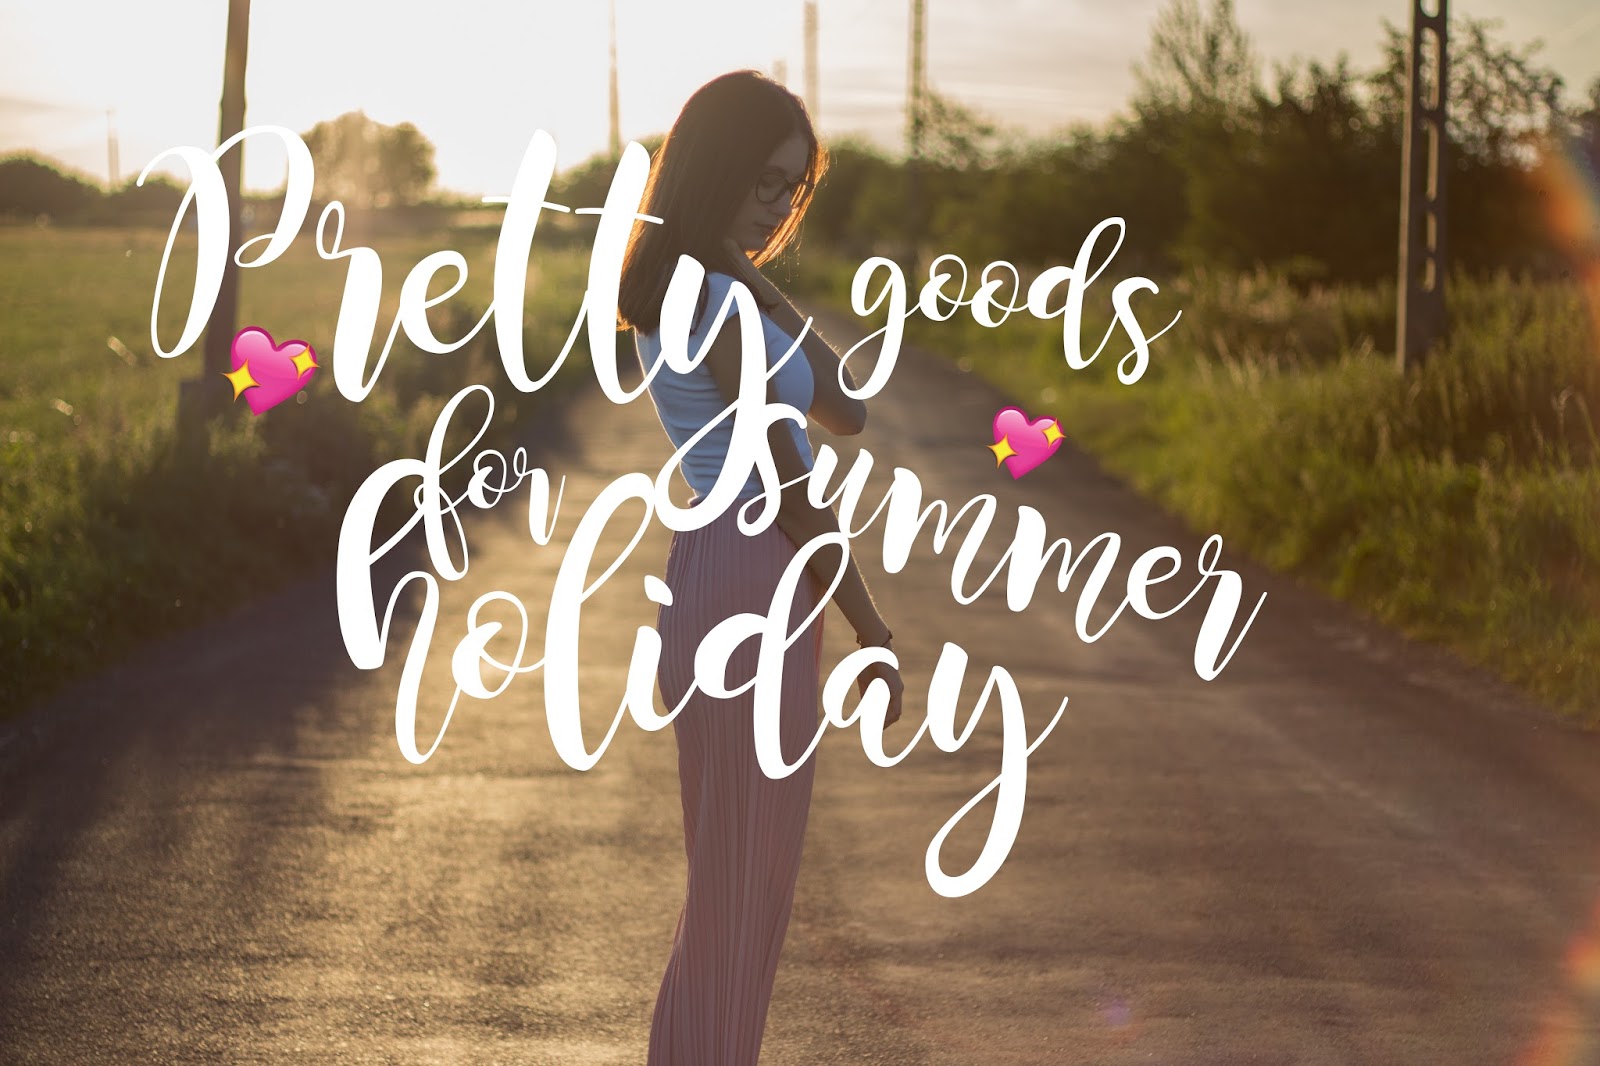 Pretty goods for summer holiday | she in 